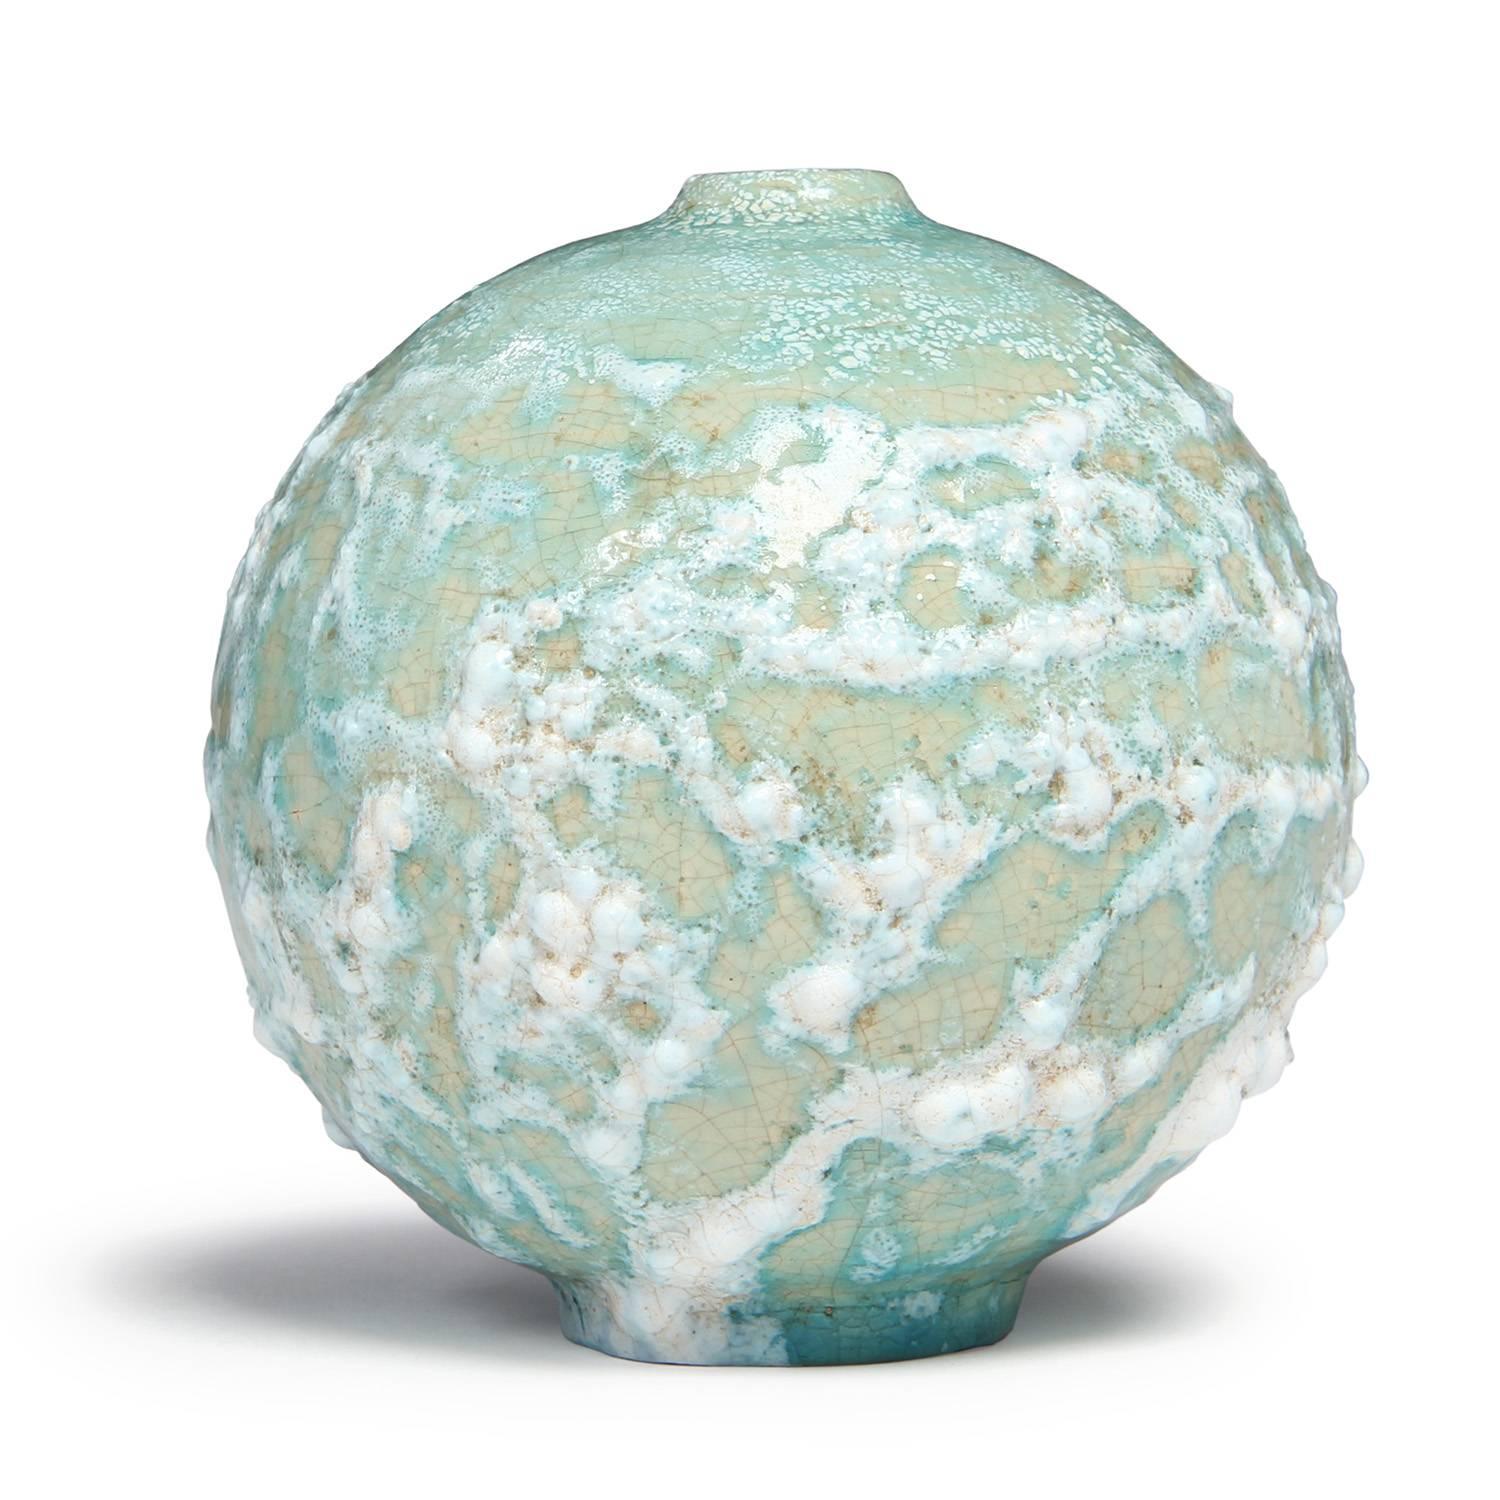 A round studio-made unique ceramic vessel with a raised narrow opening, the form covered with a rich, complex and thickened glaze in tones of celadon, cream and wheat.